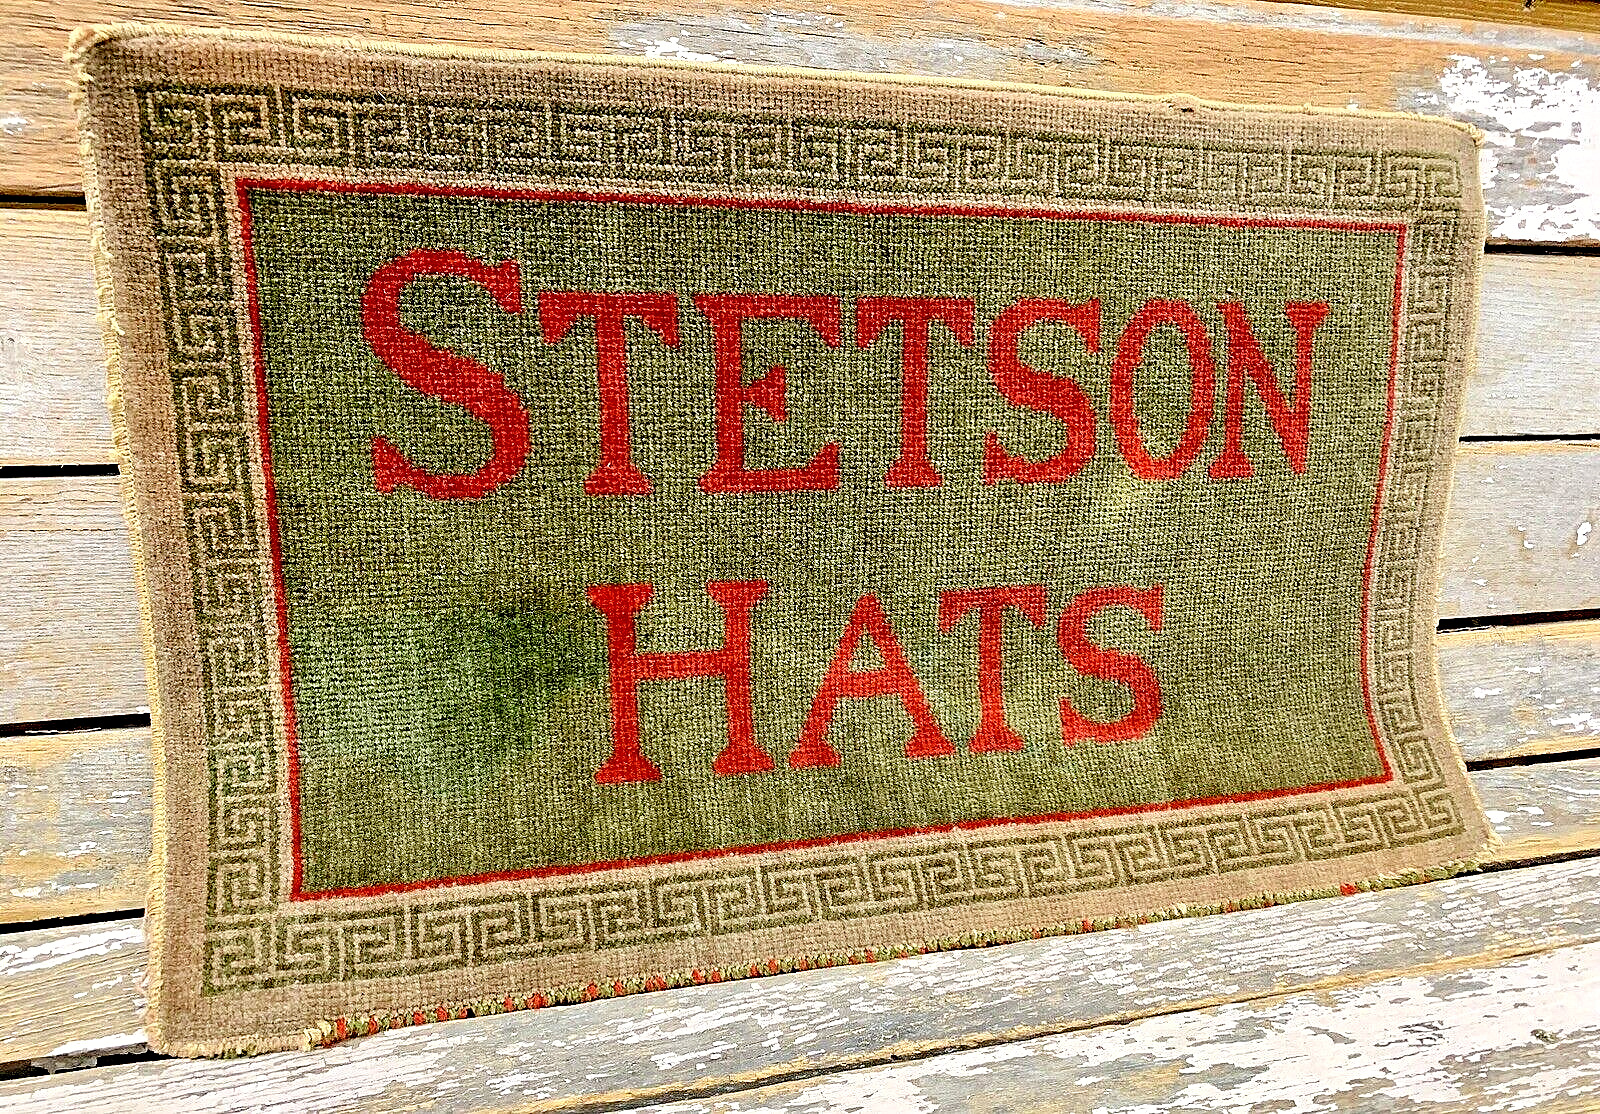 VINTAGE STETSON HATS 1950s STORE COUNTER ADVERTISING MAT